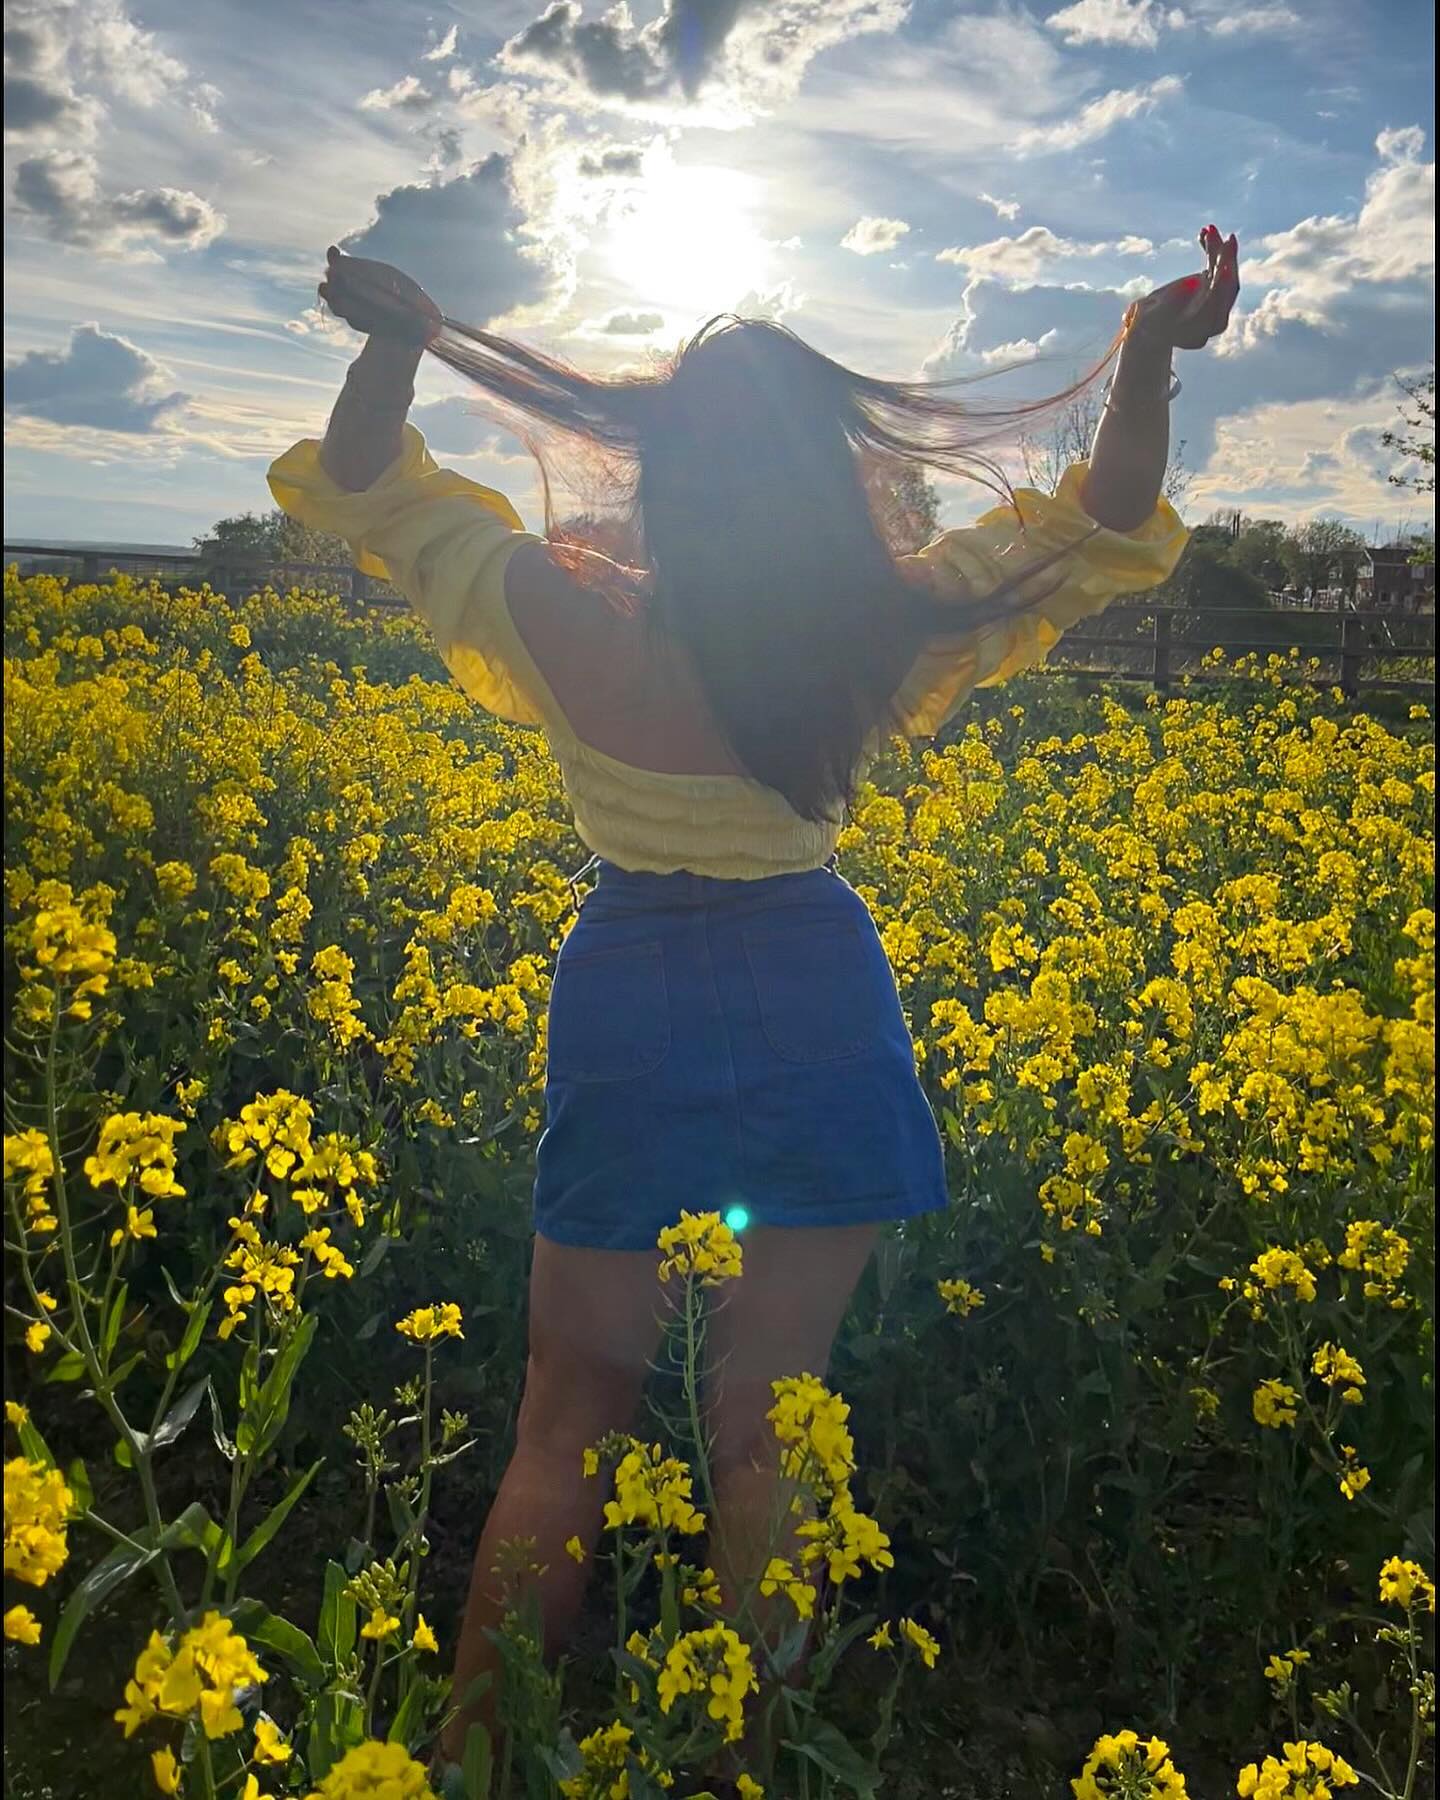 Golden dreams 💛🌿✨
Feeling romantic!🤩in fields of yellow 💫
Catching those rays at last some spring sunny days! ☀️ it was a bit windy but so beautiful! Yellow is definitely a happy colour! Had so much fun taking these pics, especially in heels !🤪🤣 there’s a funny story behind these photos ( I will tell it in my channel) 

Captured these shots as the sun was going down , do you like ?🤔
Swipe for more glowing golden girl views ! 🤩🔚 

Yellow crop top with floaty sleeves & Short denim skirt 💛
.
.
.
.
.
.
.

#romantic #croptop #yellow #sunset #style #spring #ss24 #denimskirt #brunette #photography #sunshine